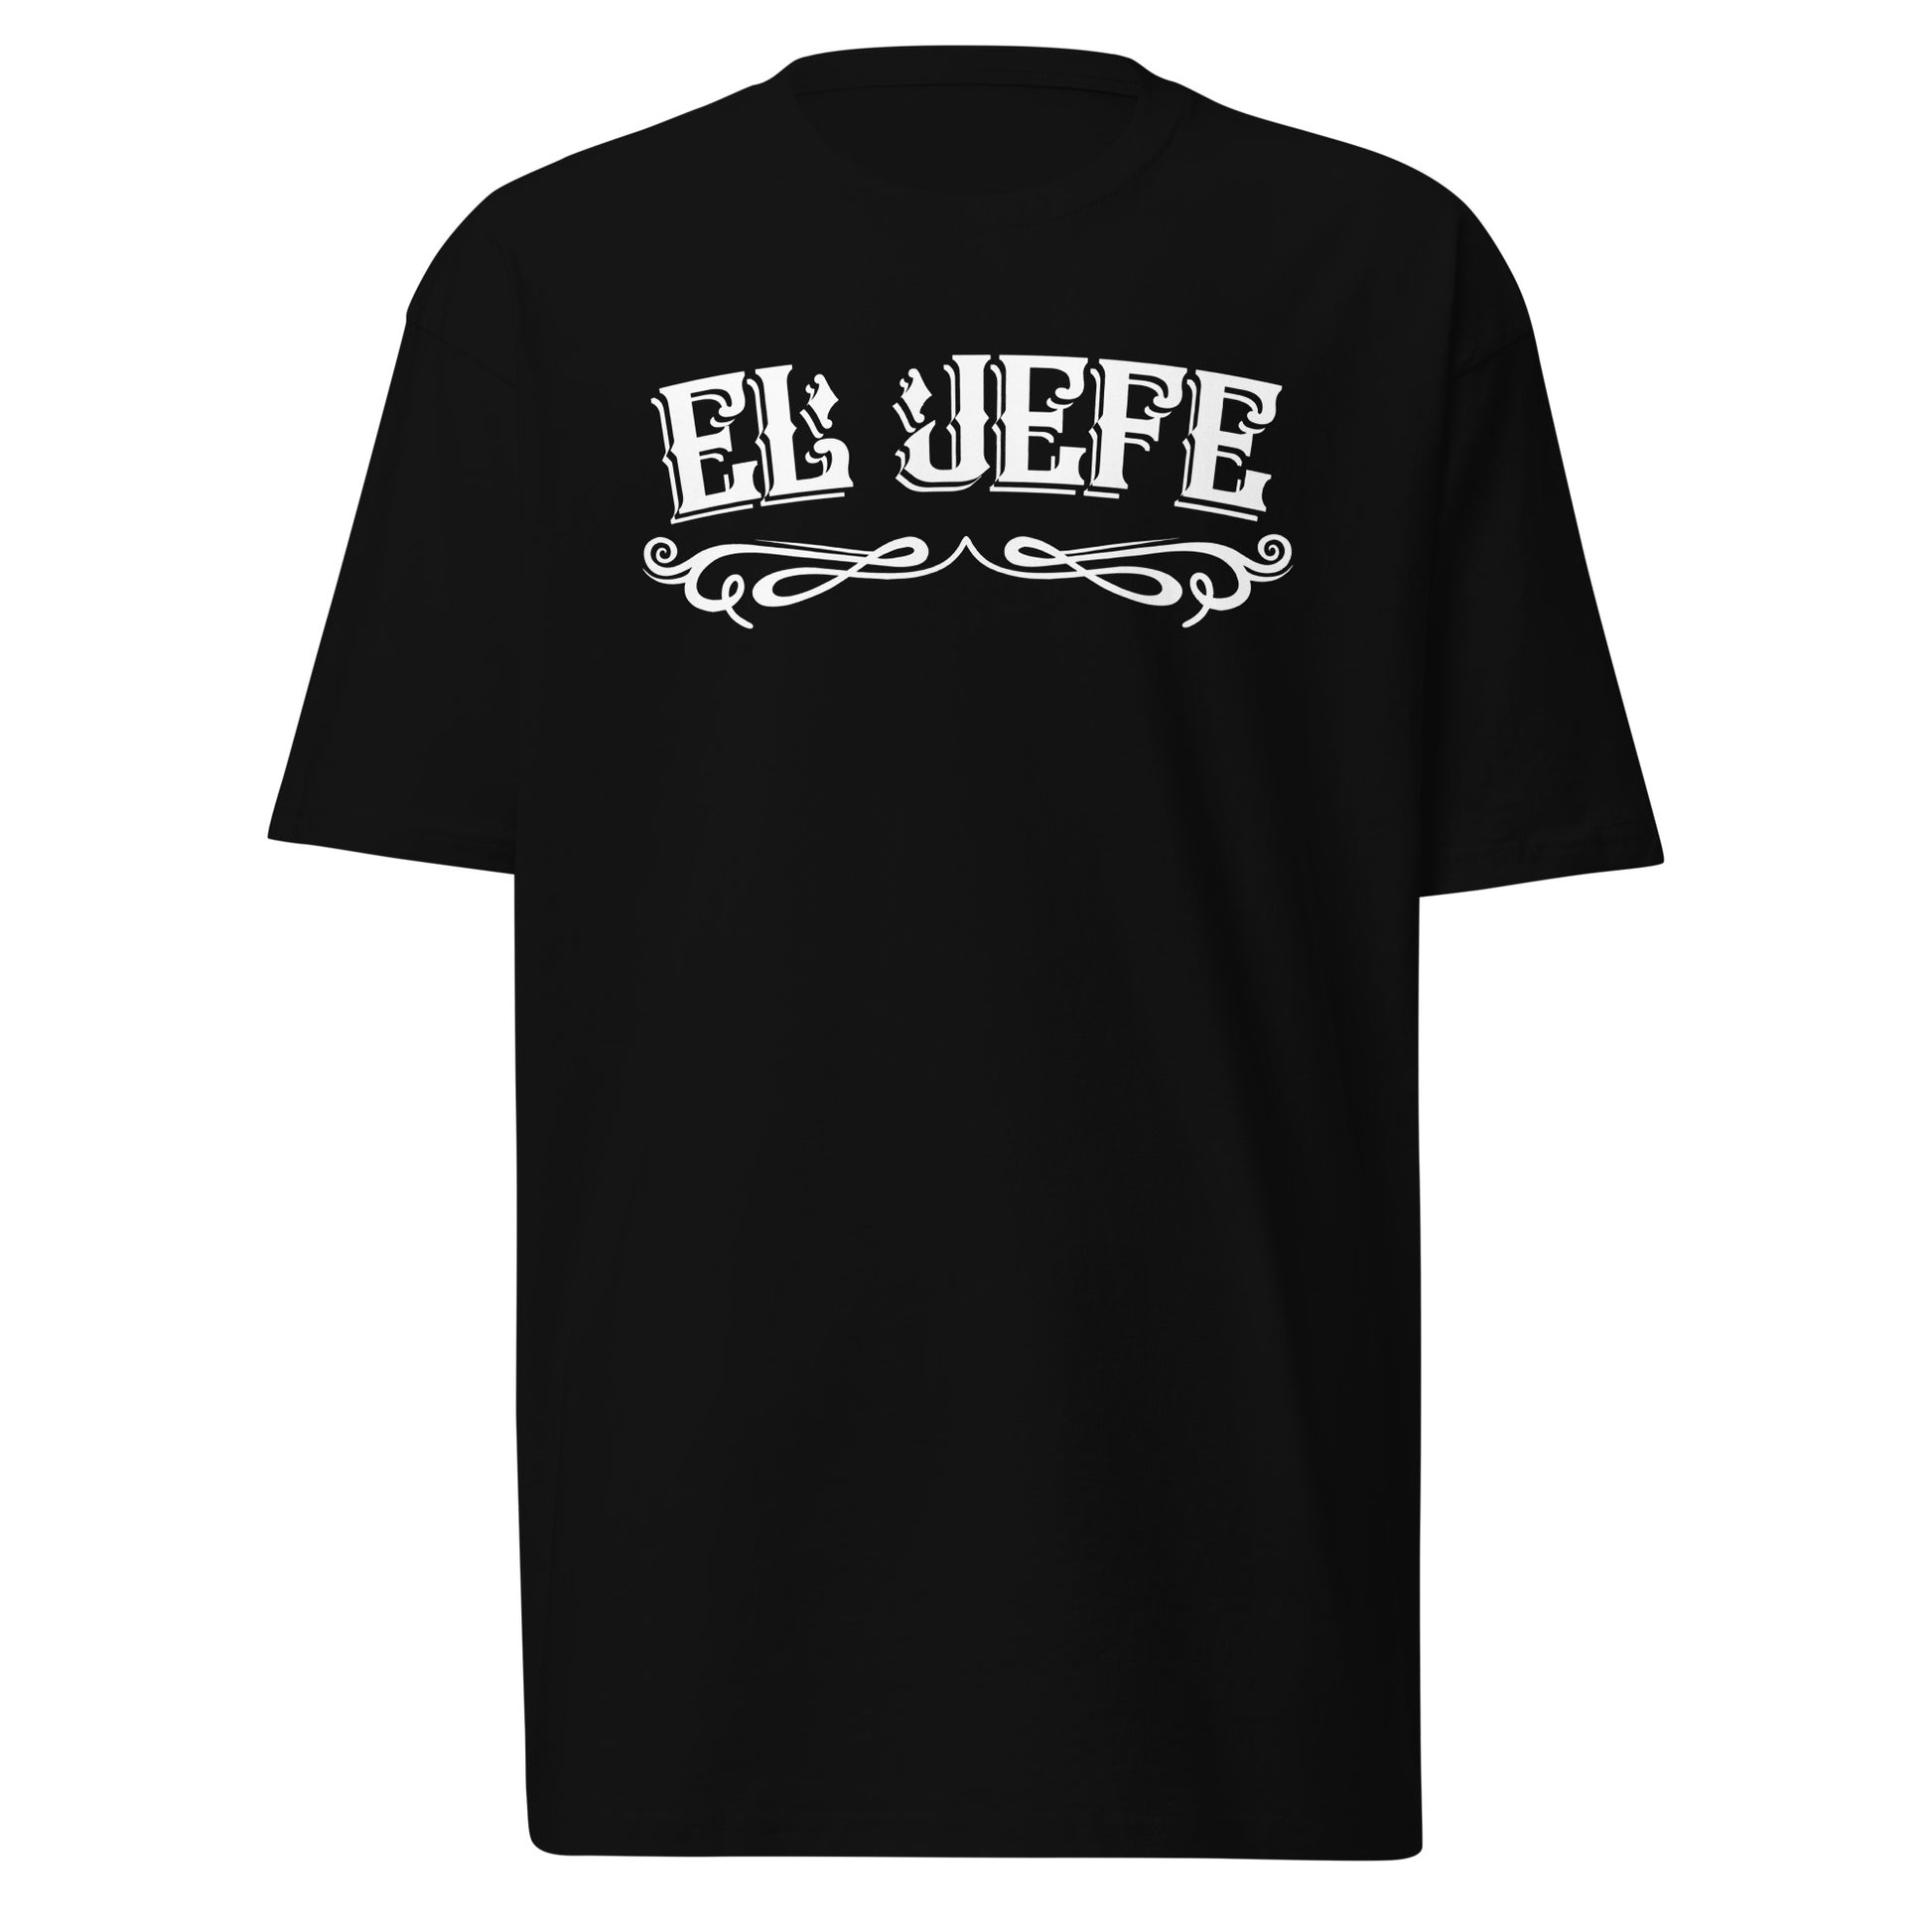 Front view of black "El Jefe" T-shirt featuring classic Chicano text design.